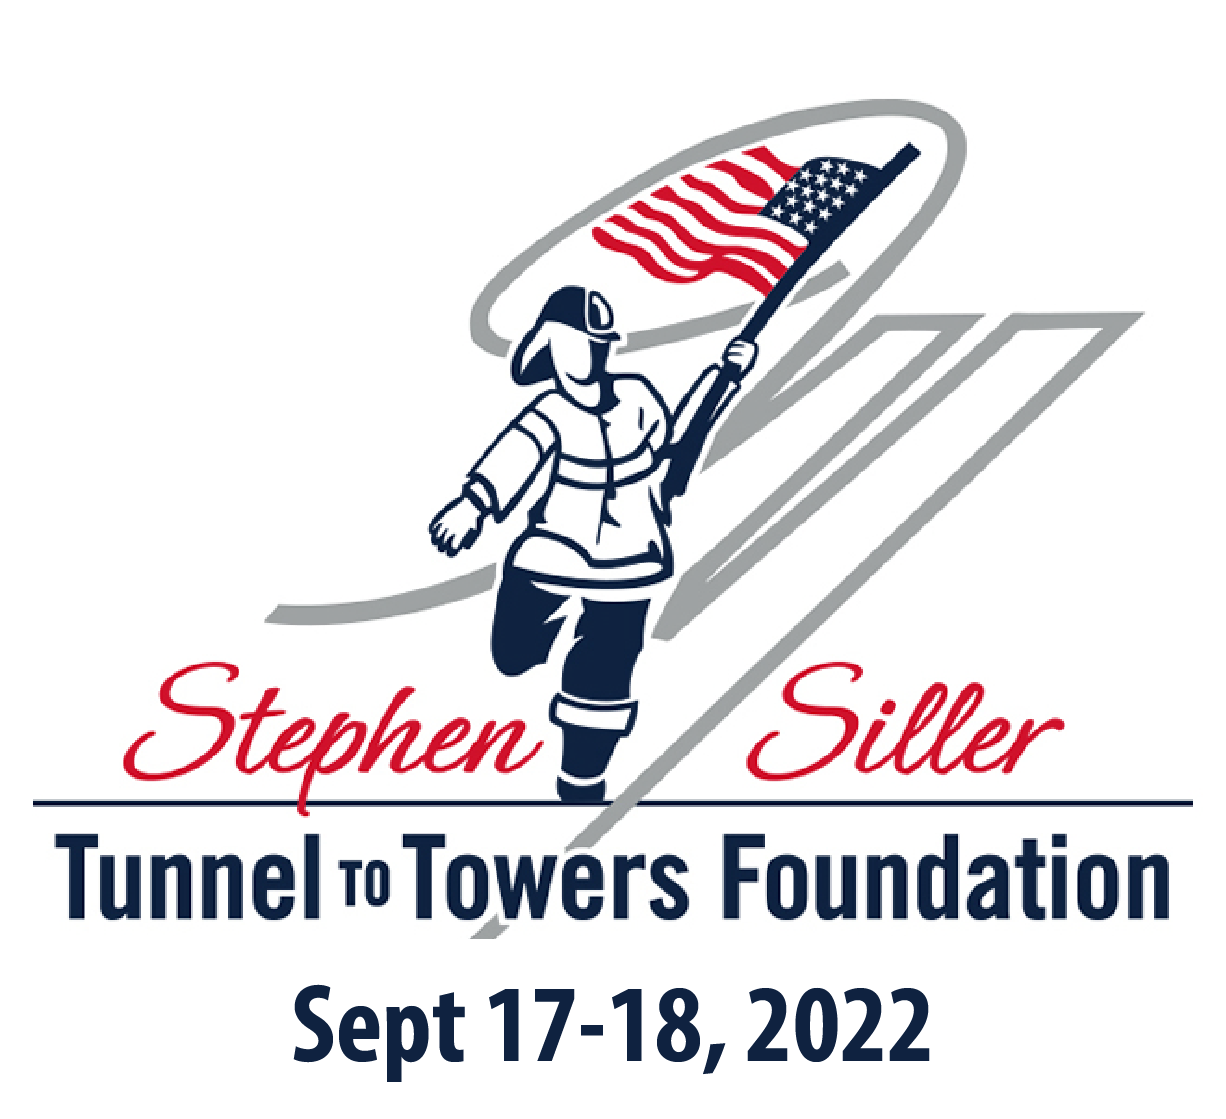 Tunnel to Towers